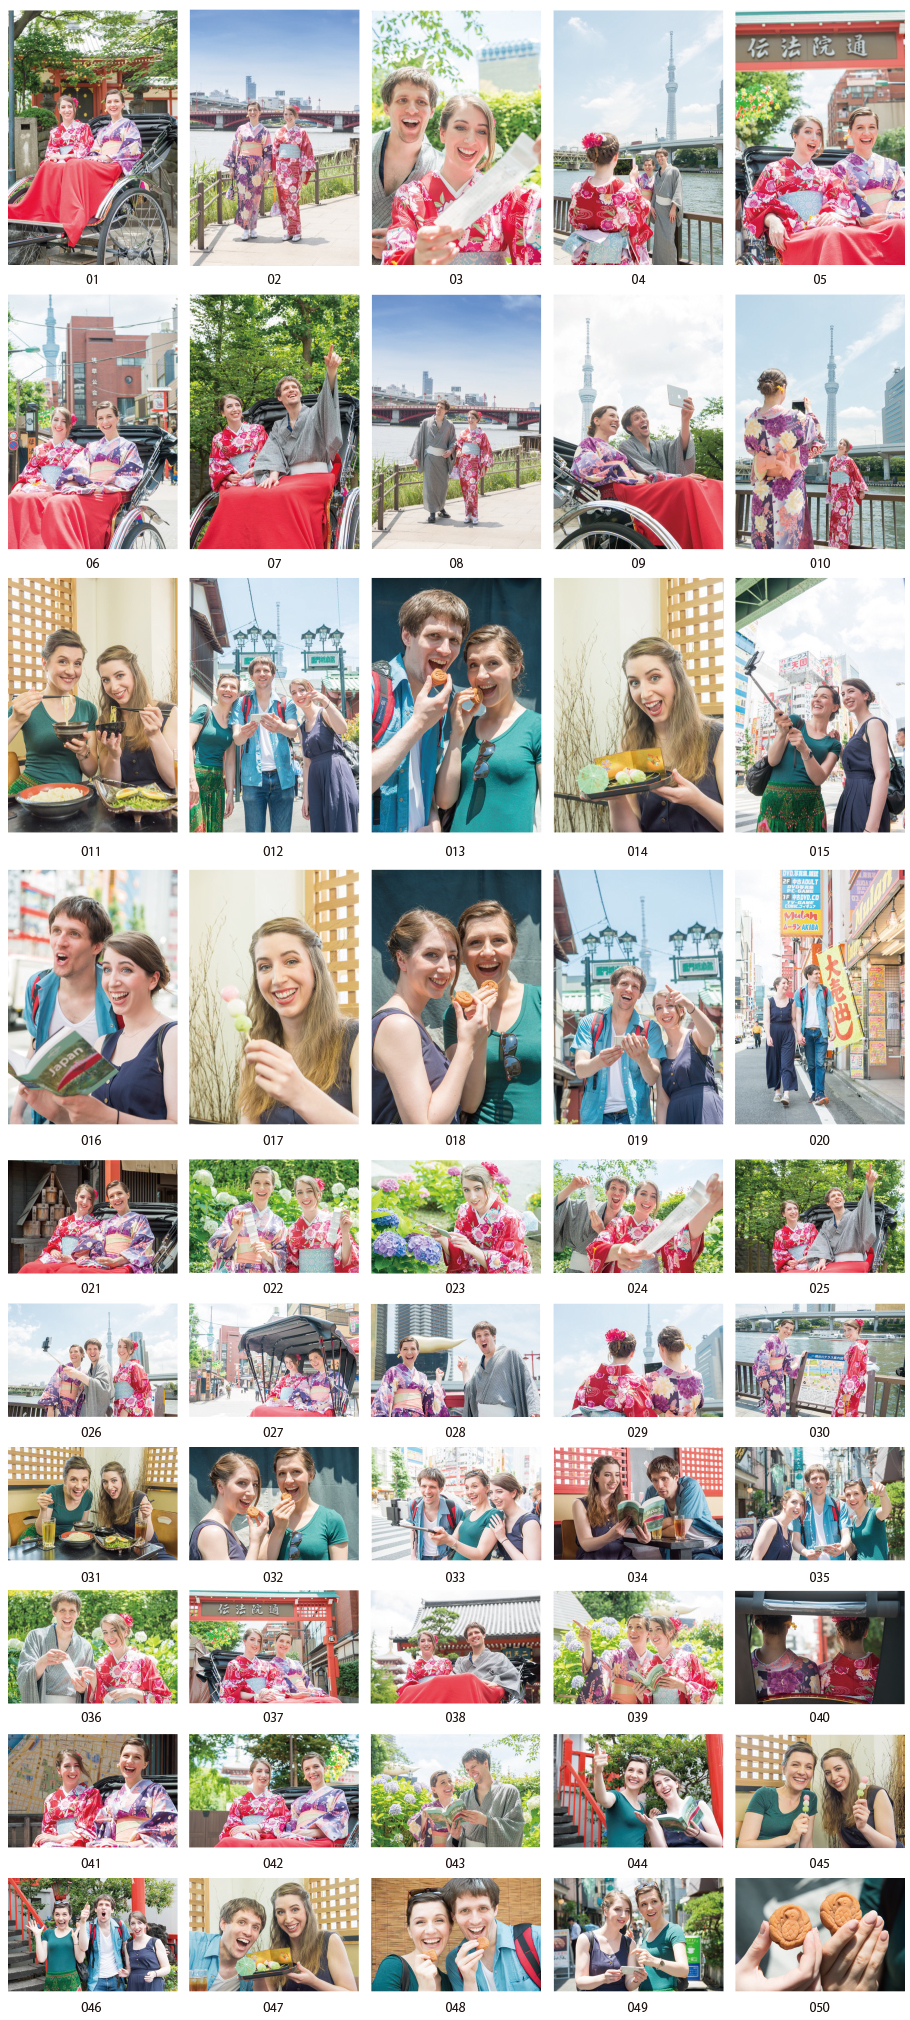 Photos of foreign tourists